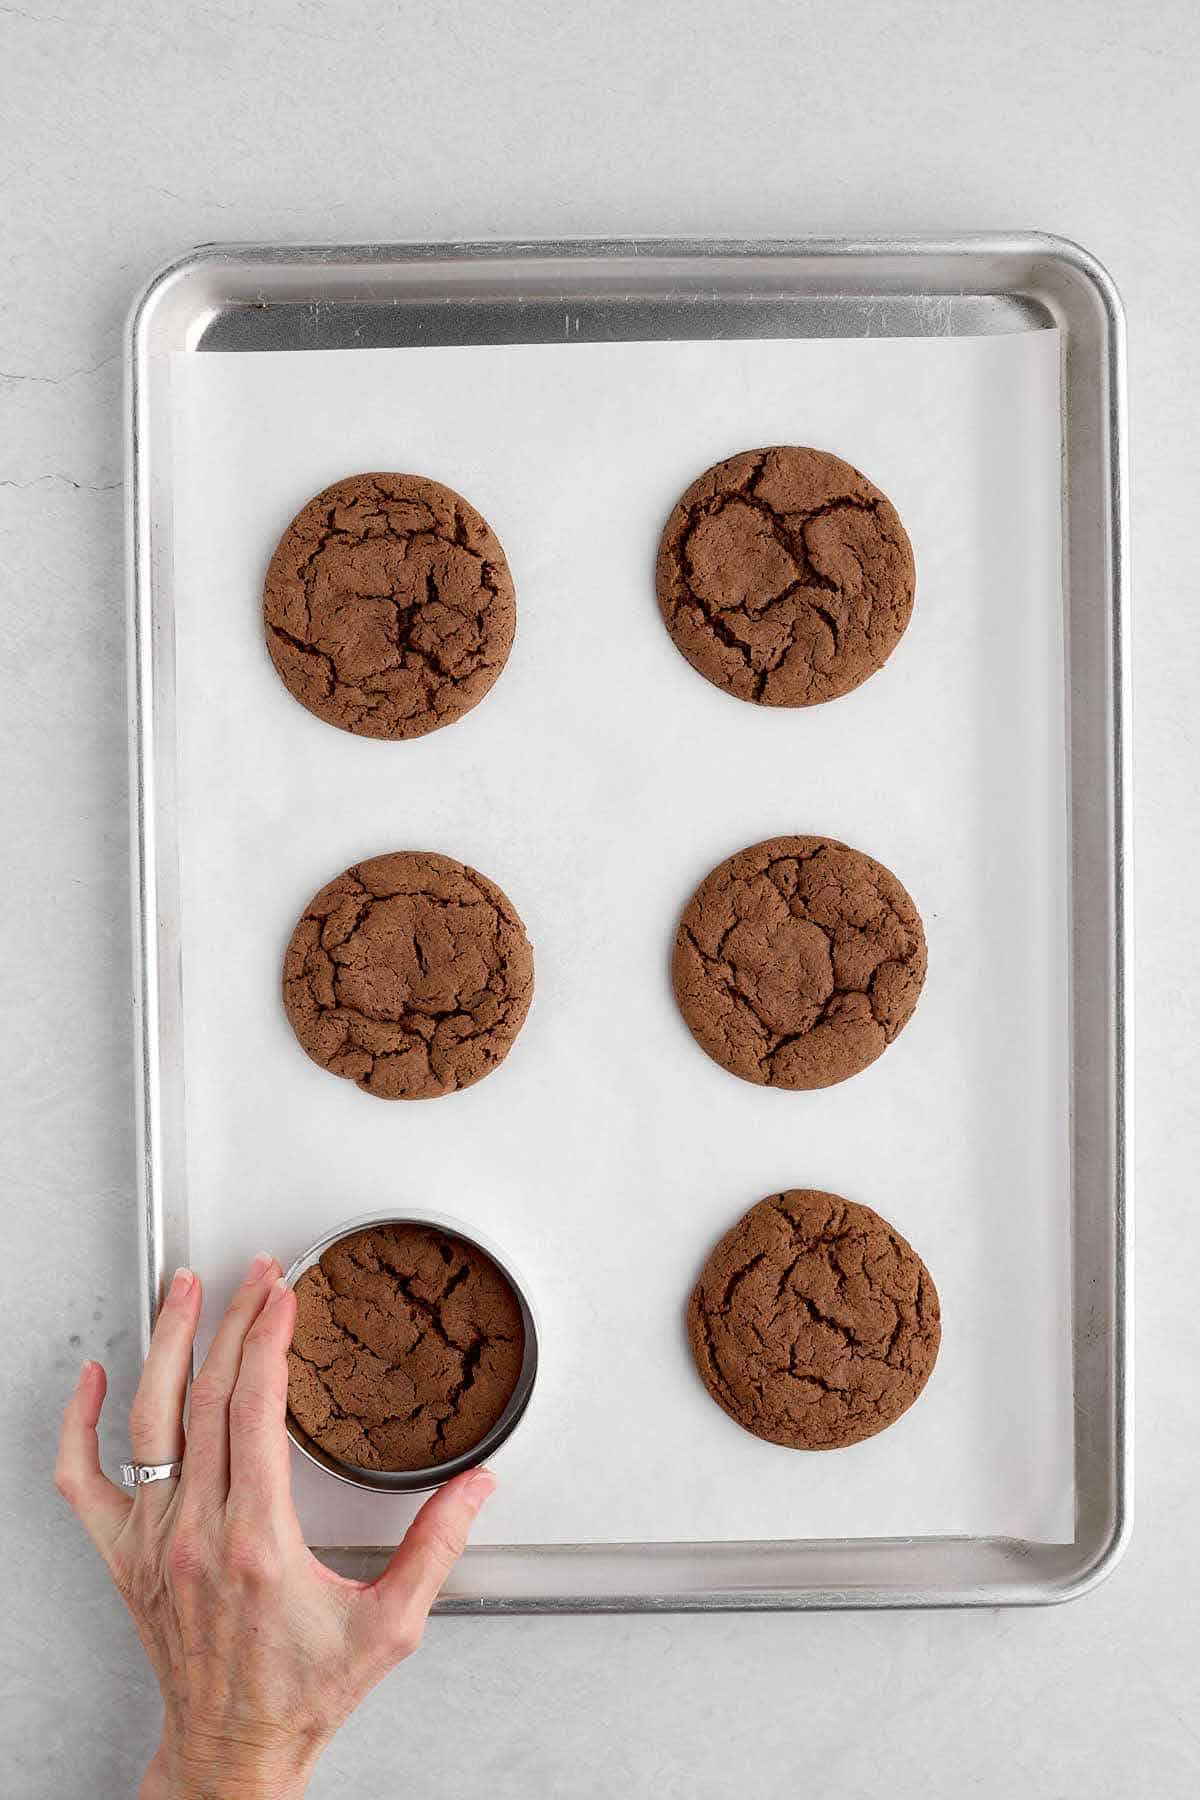 Circling the baked cookies with a cookie ring.